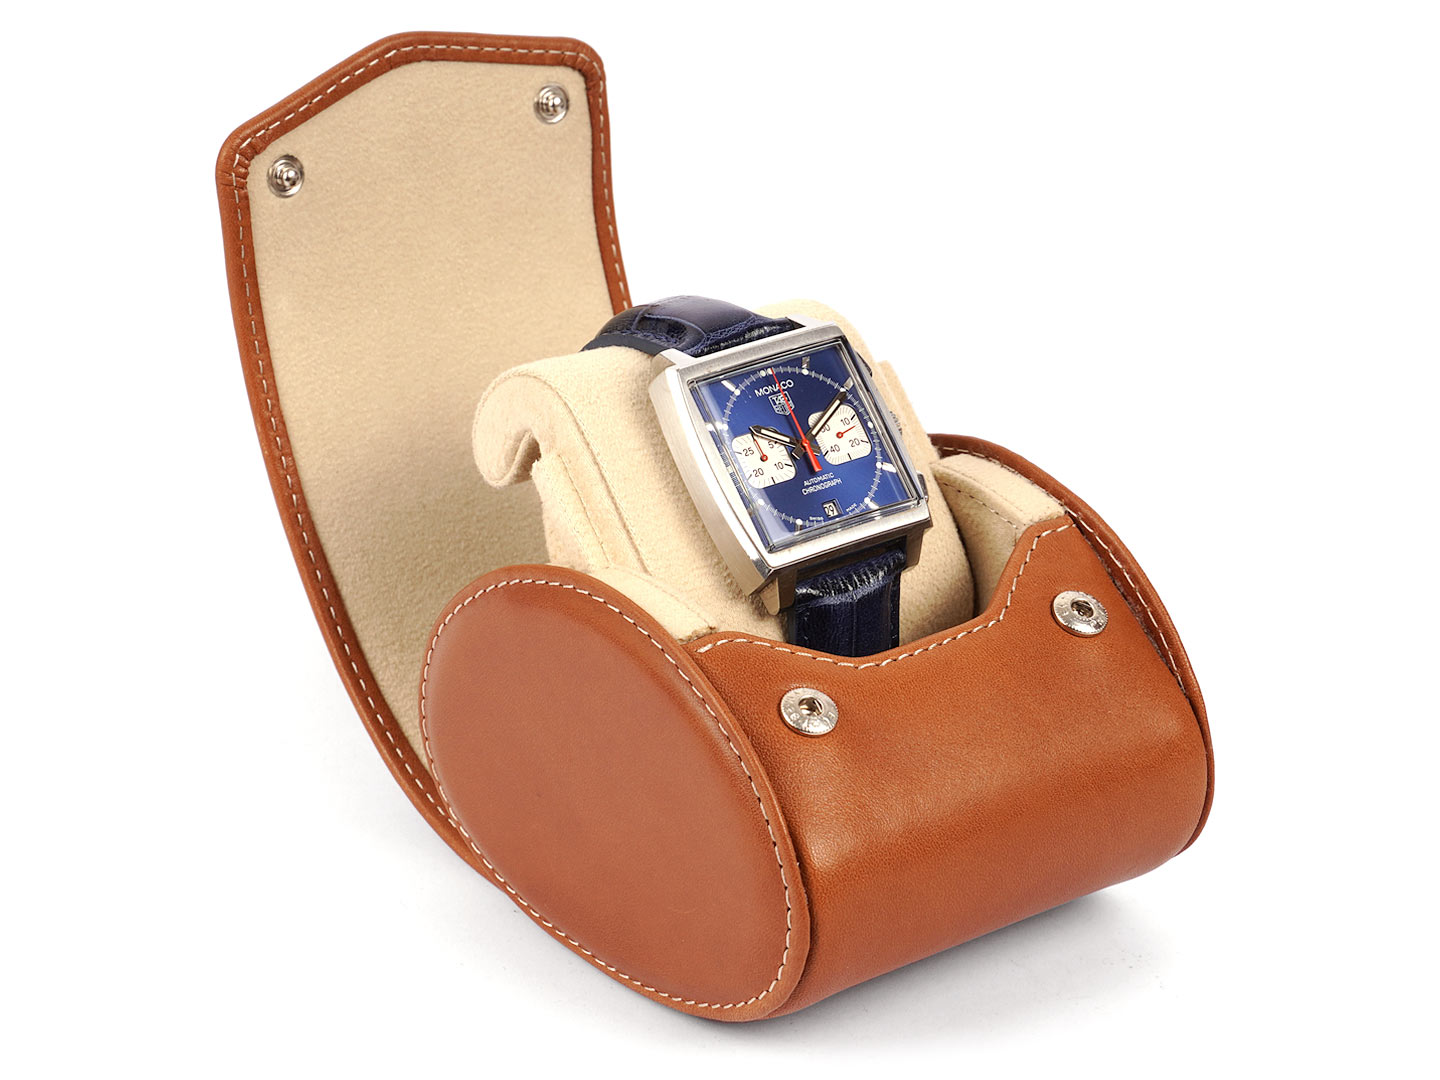 Sinlge-watch-case-cognac-leather-closed-perspective-Carapaz